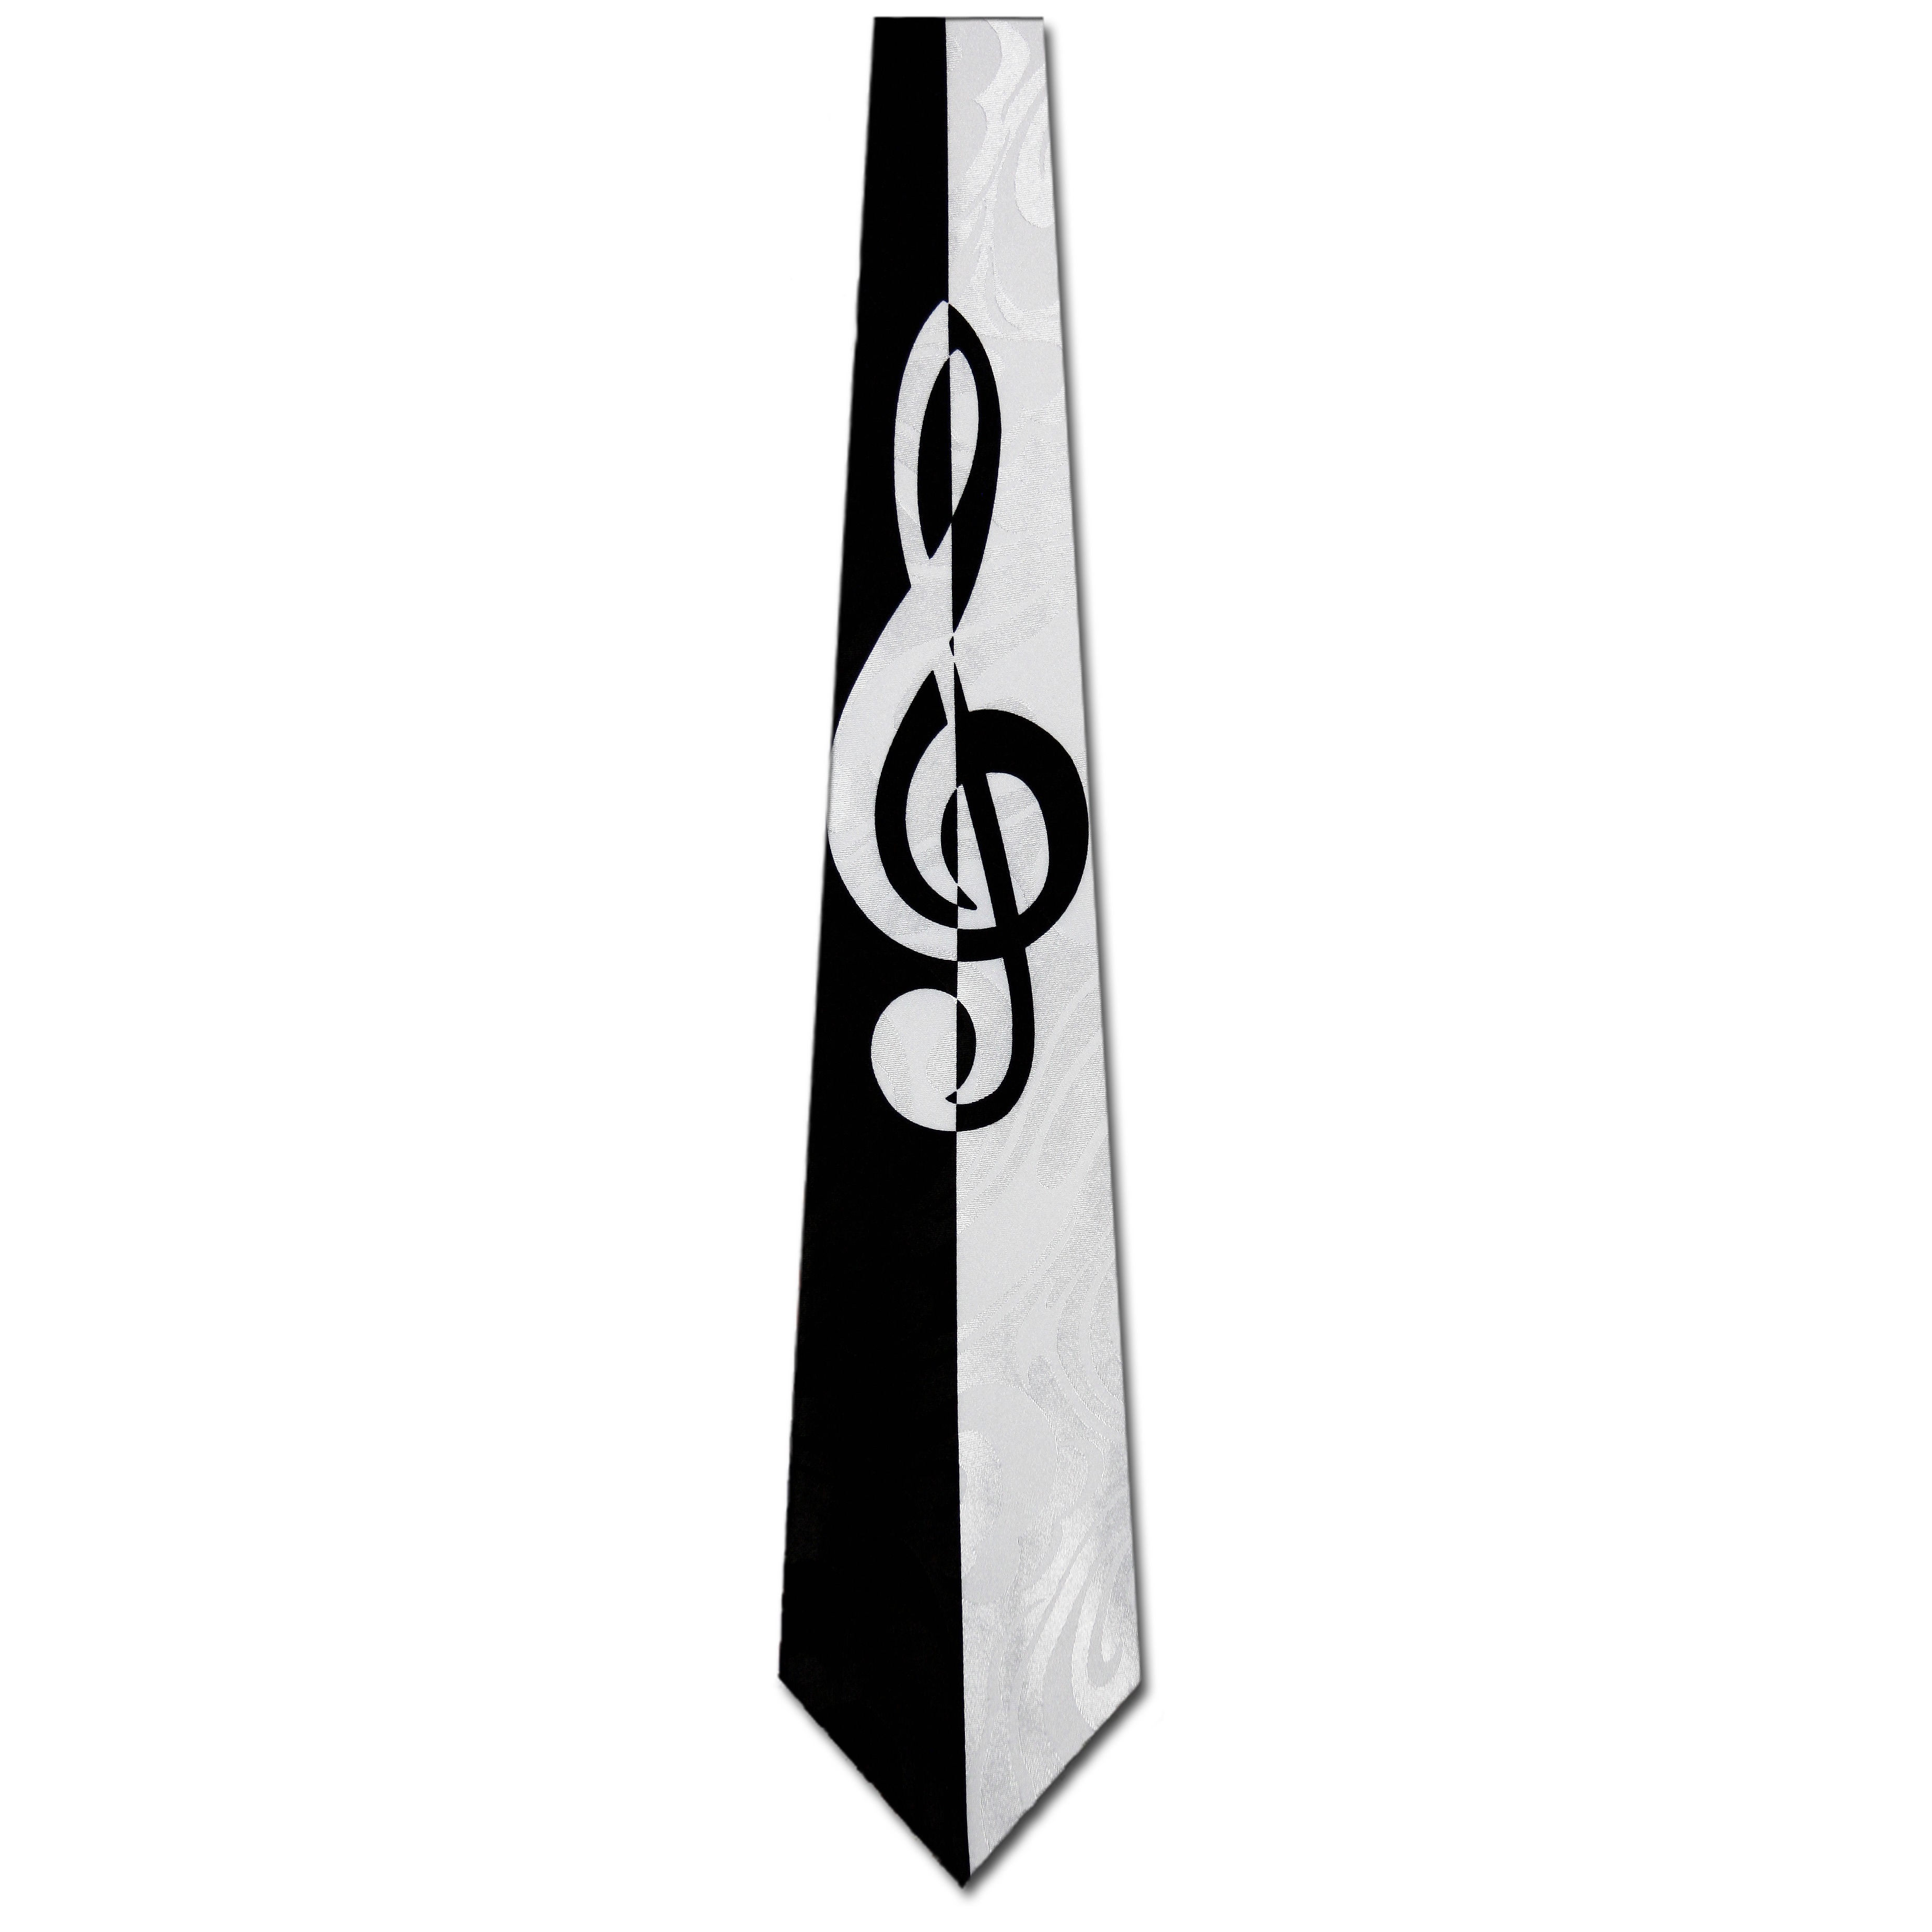 G Clef Black and White Necktie Mens Tie by Steven - image 2 of 3